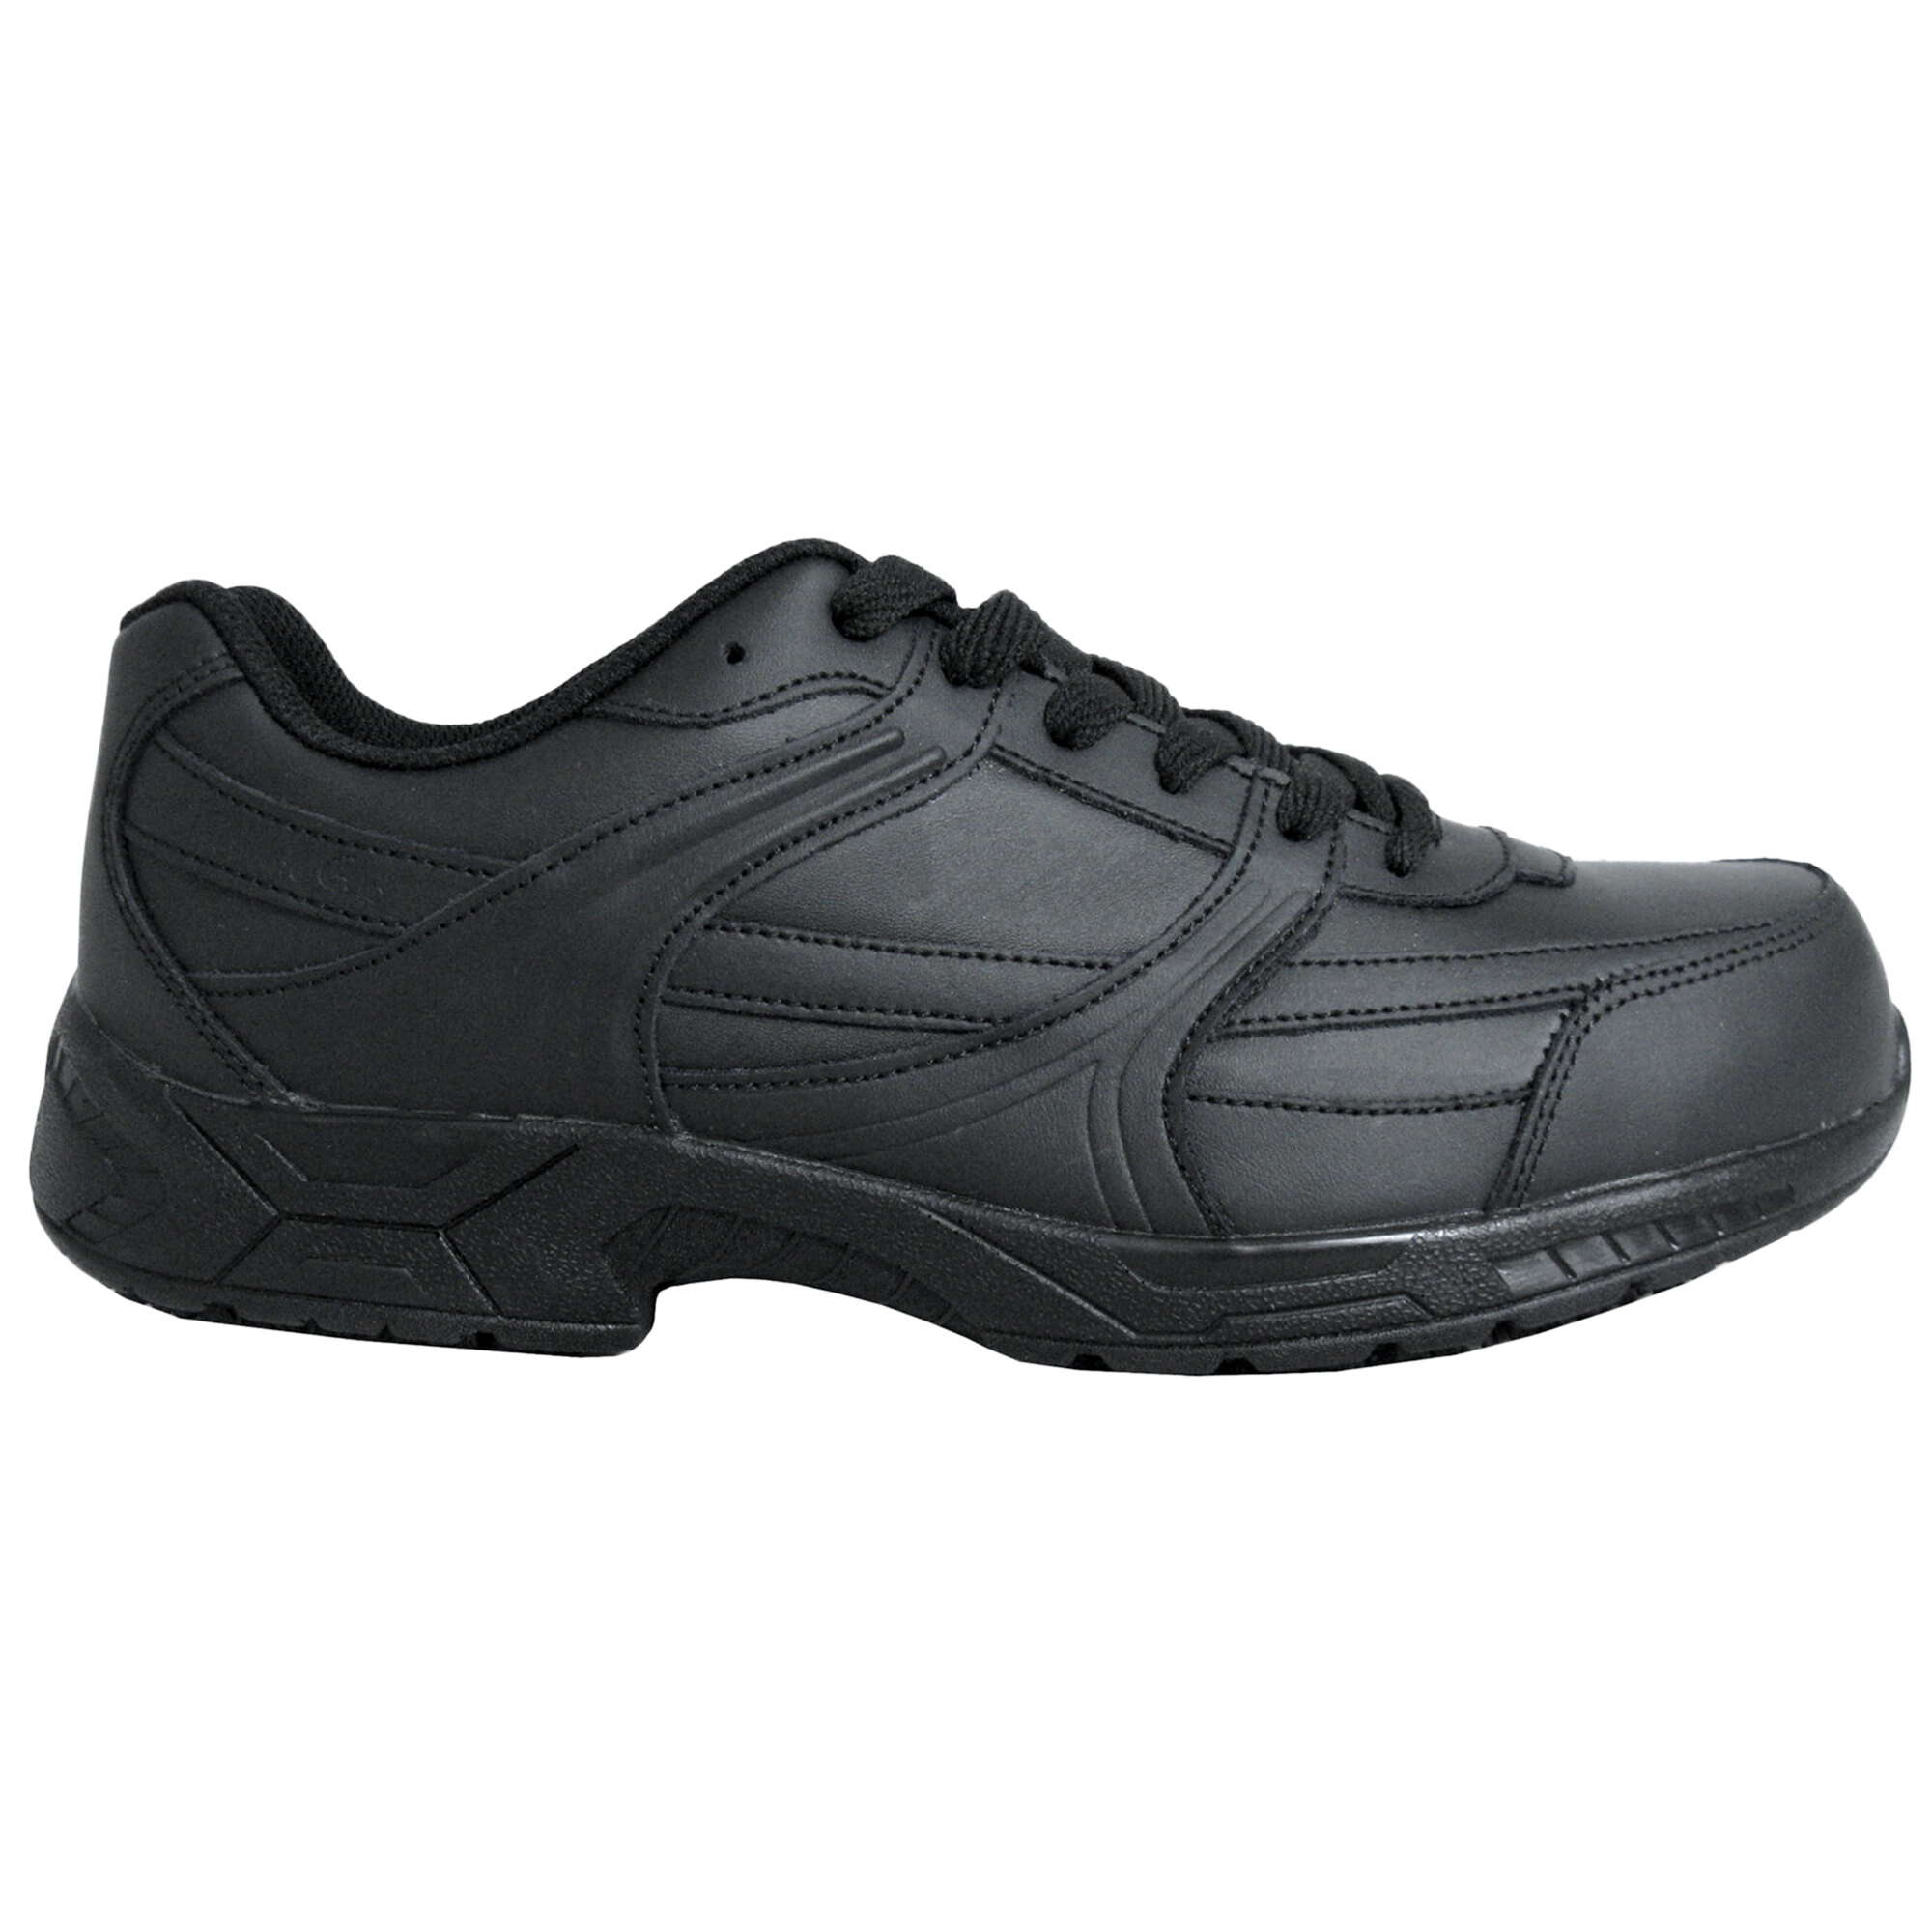 Genuine Grip 1010 Men's Size 13 Wide Width Black Leather Athletic Non ...